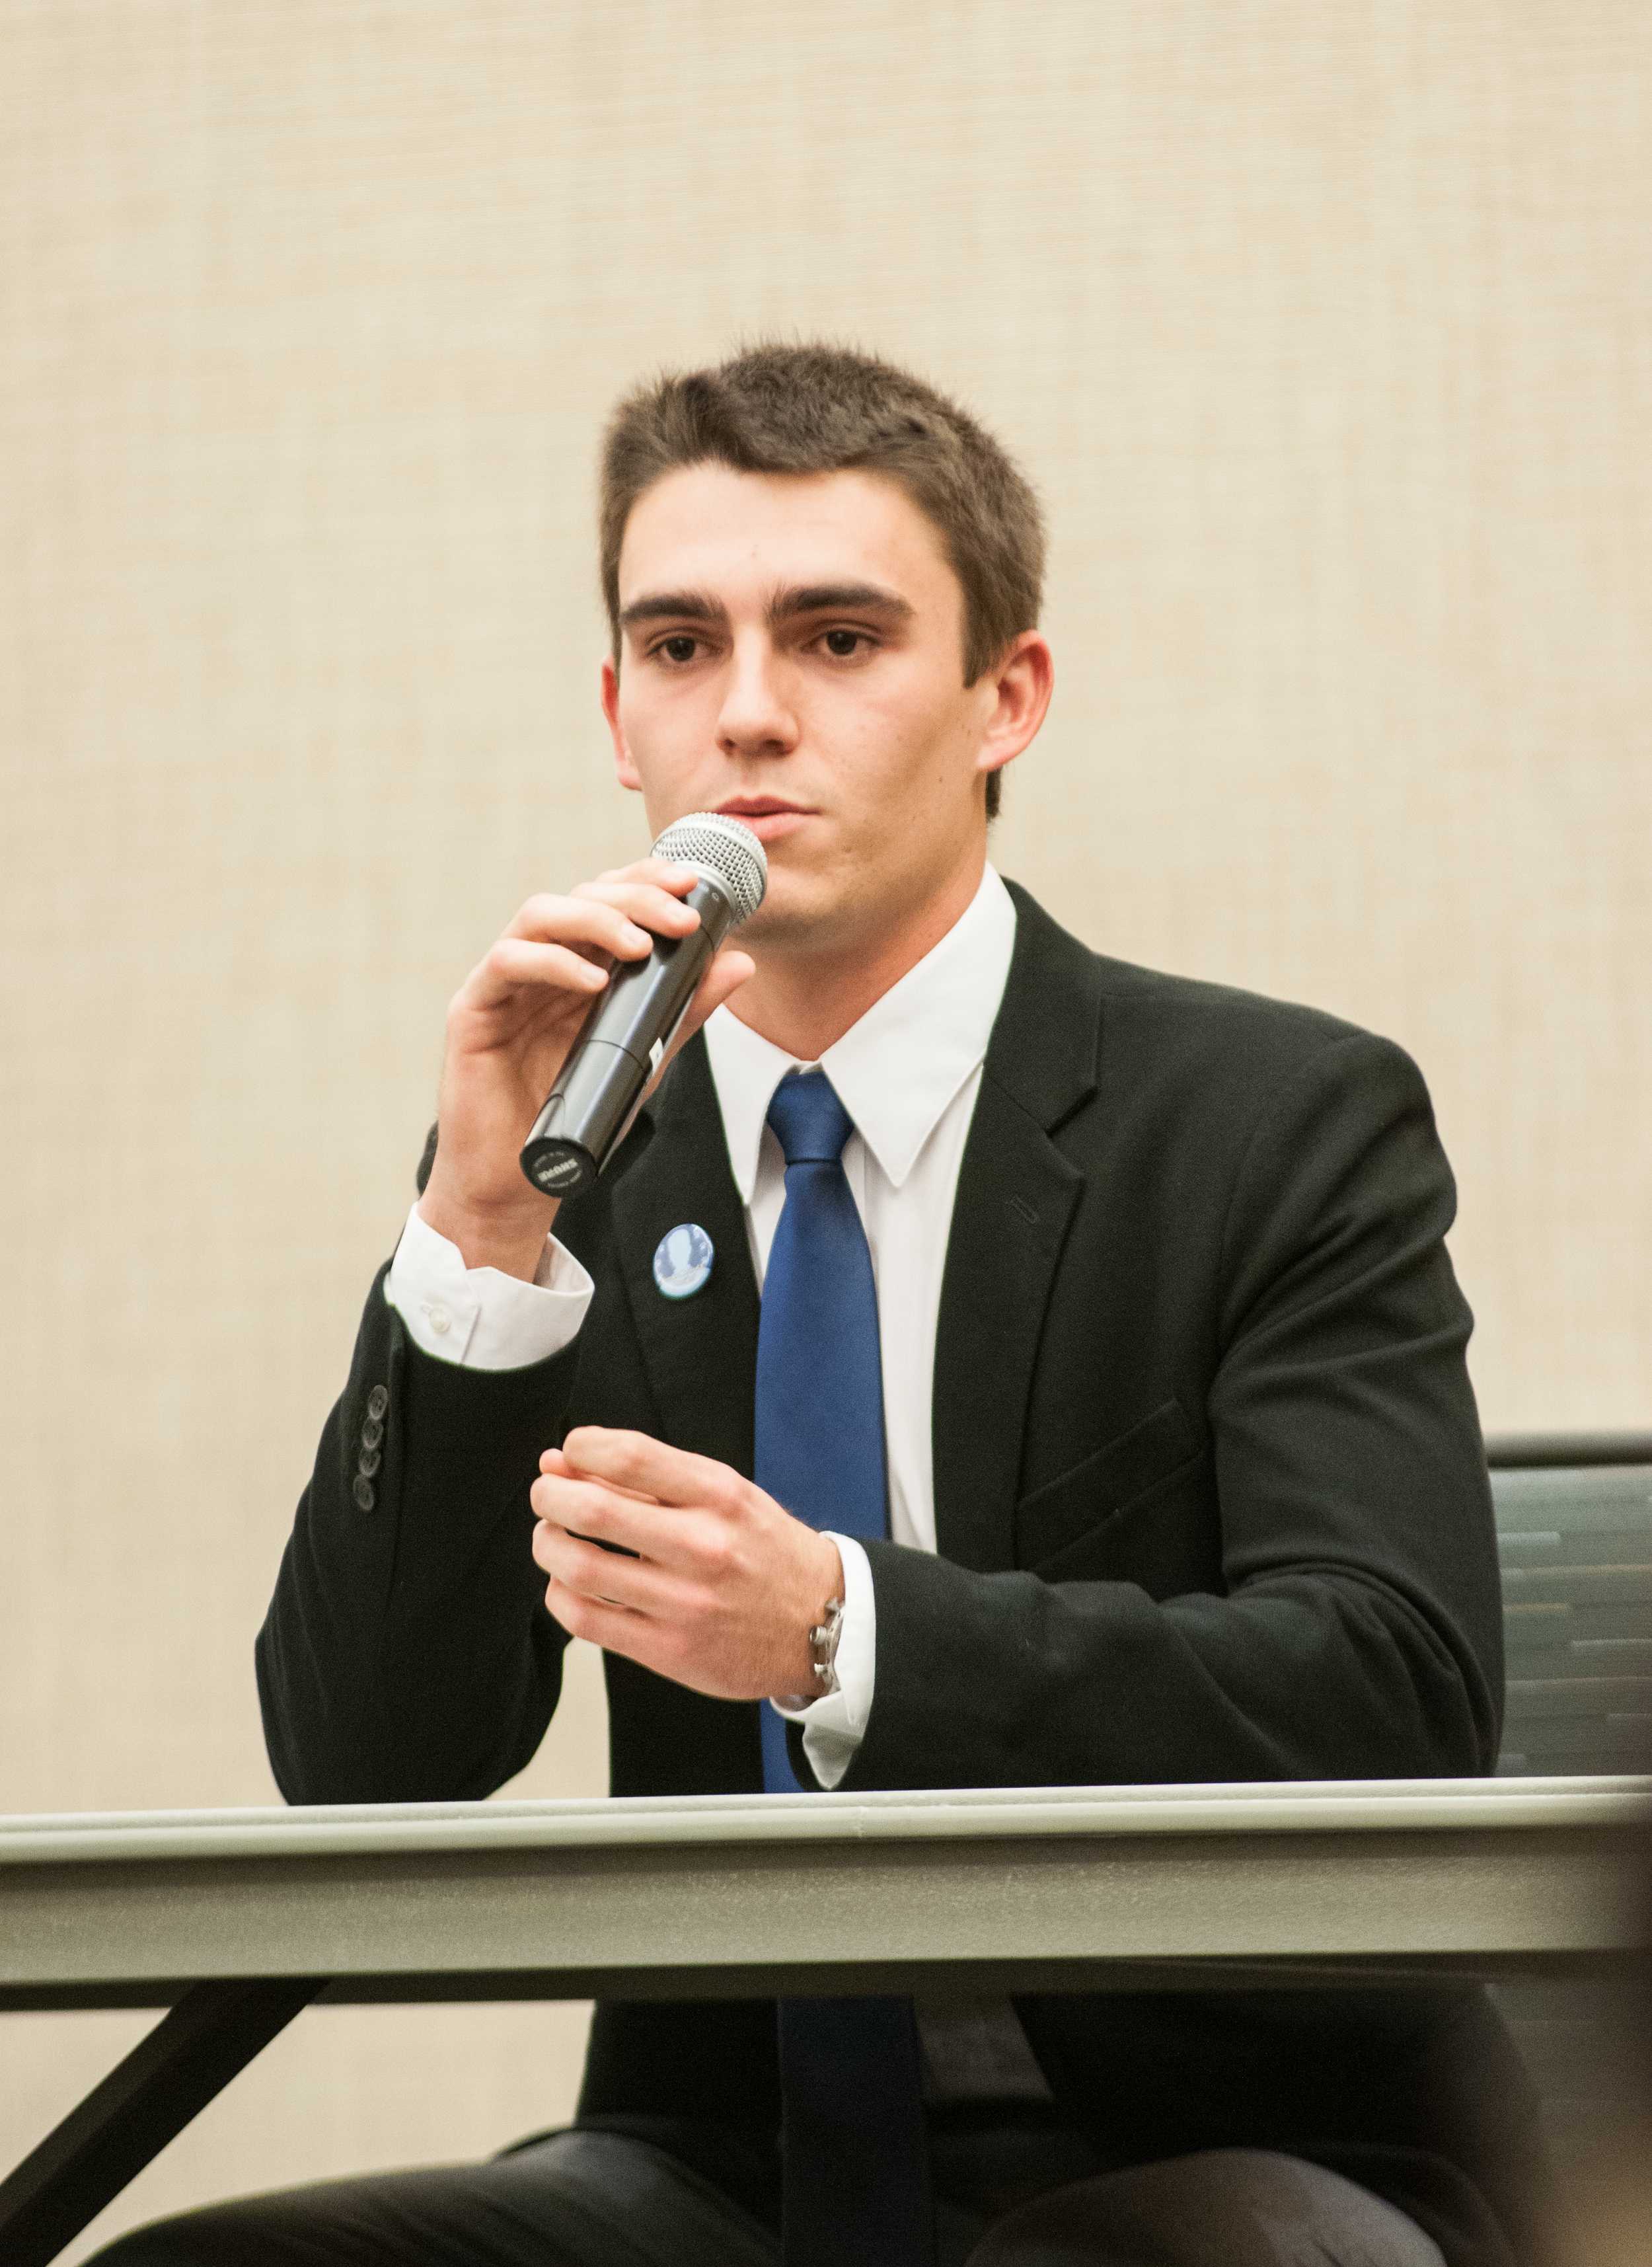 STAR // Gustavo VasquezCandidates for Associated Students President participated in a presidential debate on March 3, showcasing their strengths and weaknesses. See more photos of the presidential debate on page 12.